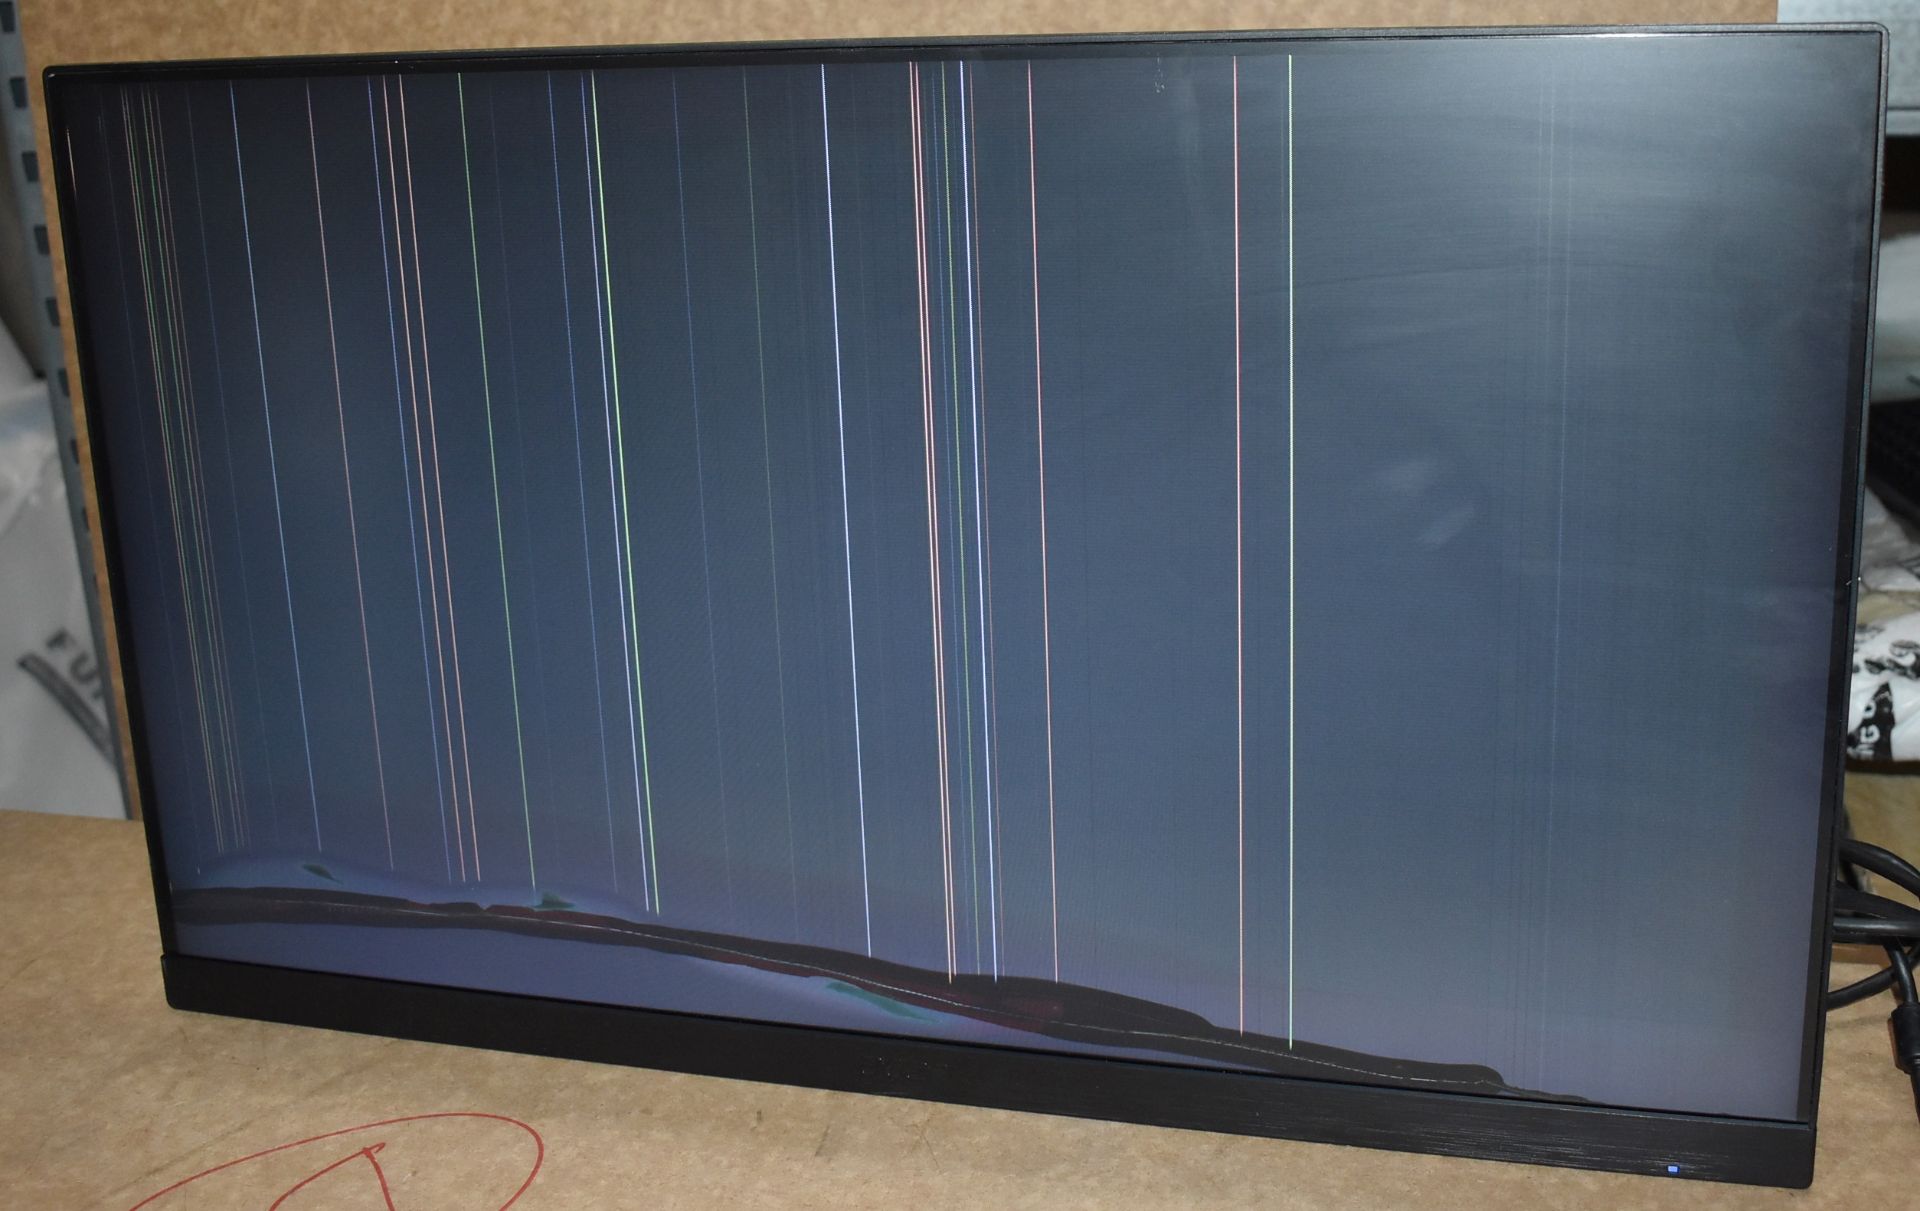 15 x Acer 27 Inch FHD Monitors - Model ET271 - Spares or Repairs With Damaged Screens - Ref: - Image 20 of 22